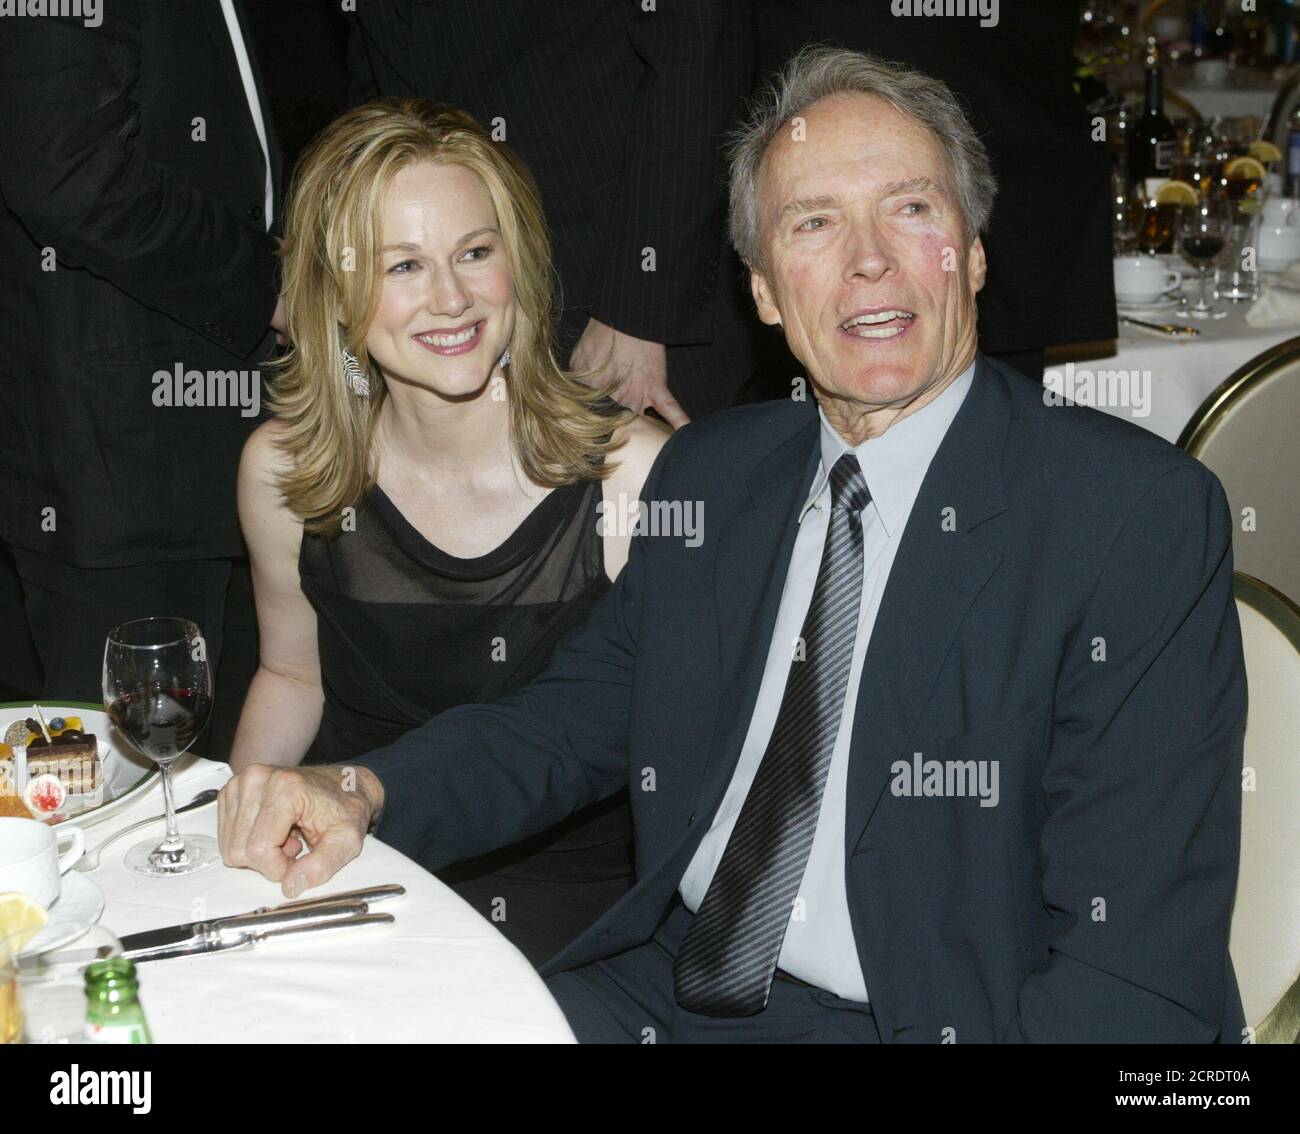 Director Clint Eastwood and actress Laura Linney converse after the 9th  annual Critics Choice Awards sponsored by the Broadcast Film Critics  Association January 10, 2004 in Beverly Hills. Eastwood directed the film "